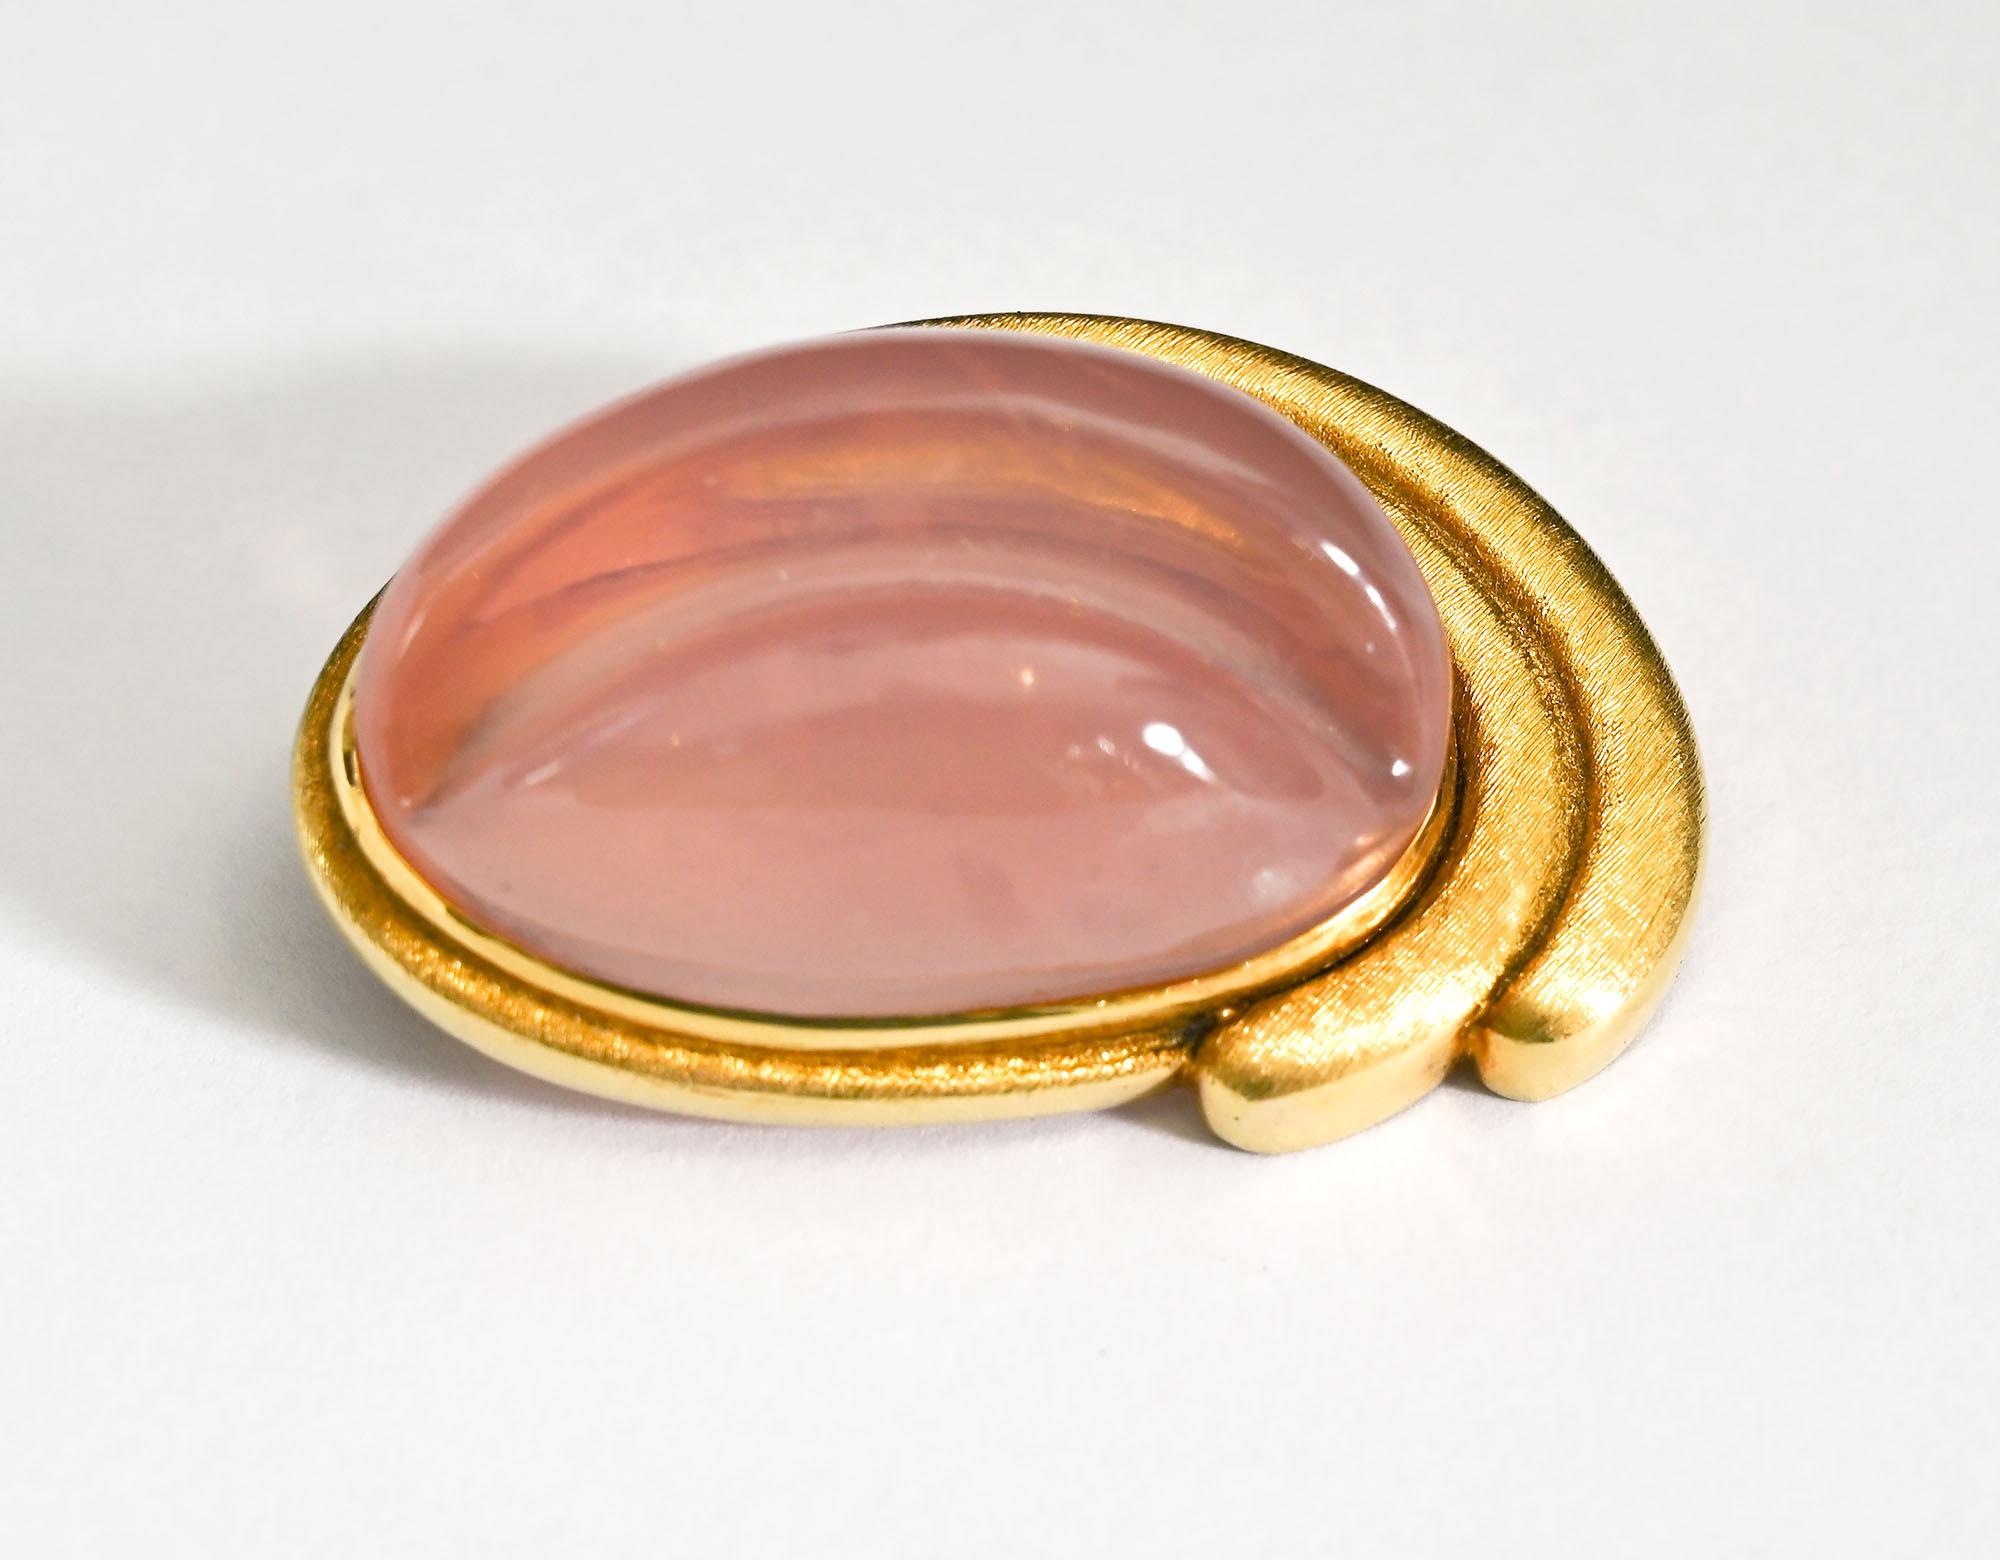 Rose quartz is set in  18 karat gold in this brooch by Roberto Burle Marx, Brazil's most well known jeweler.
The oval stone is cut in the forma livre, or free  form style he often favored.. The gold has a slightly brushed  finish. The brooch has a